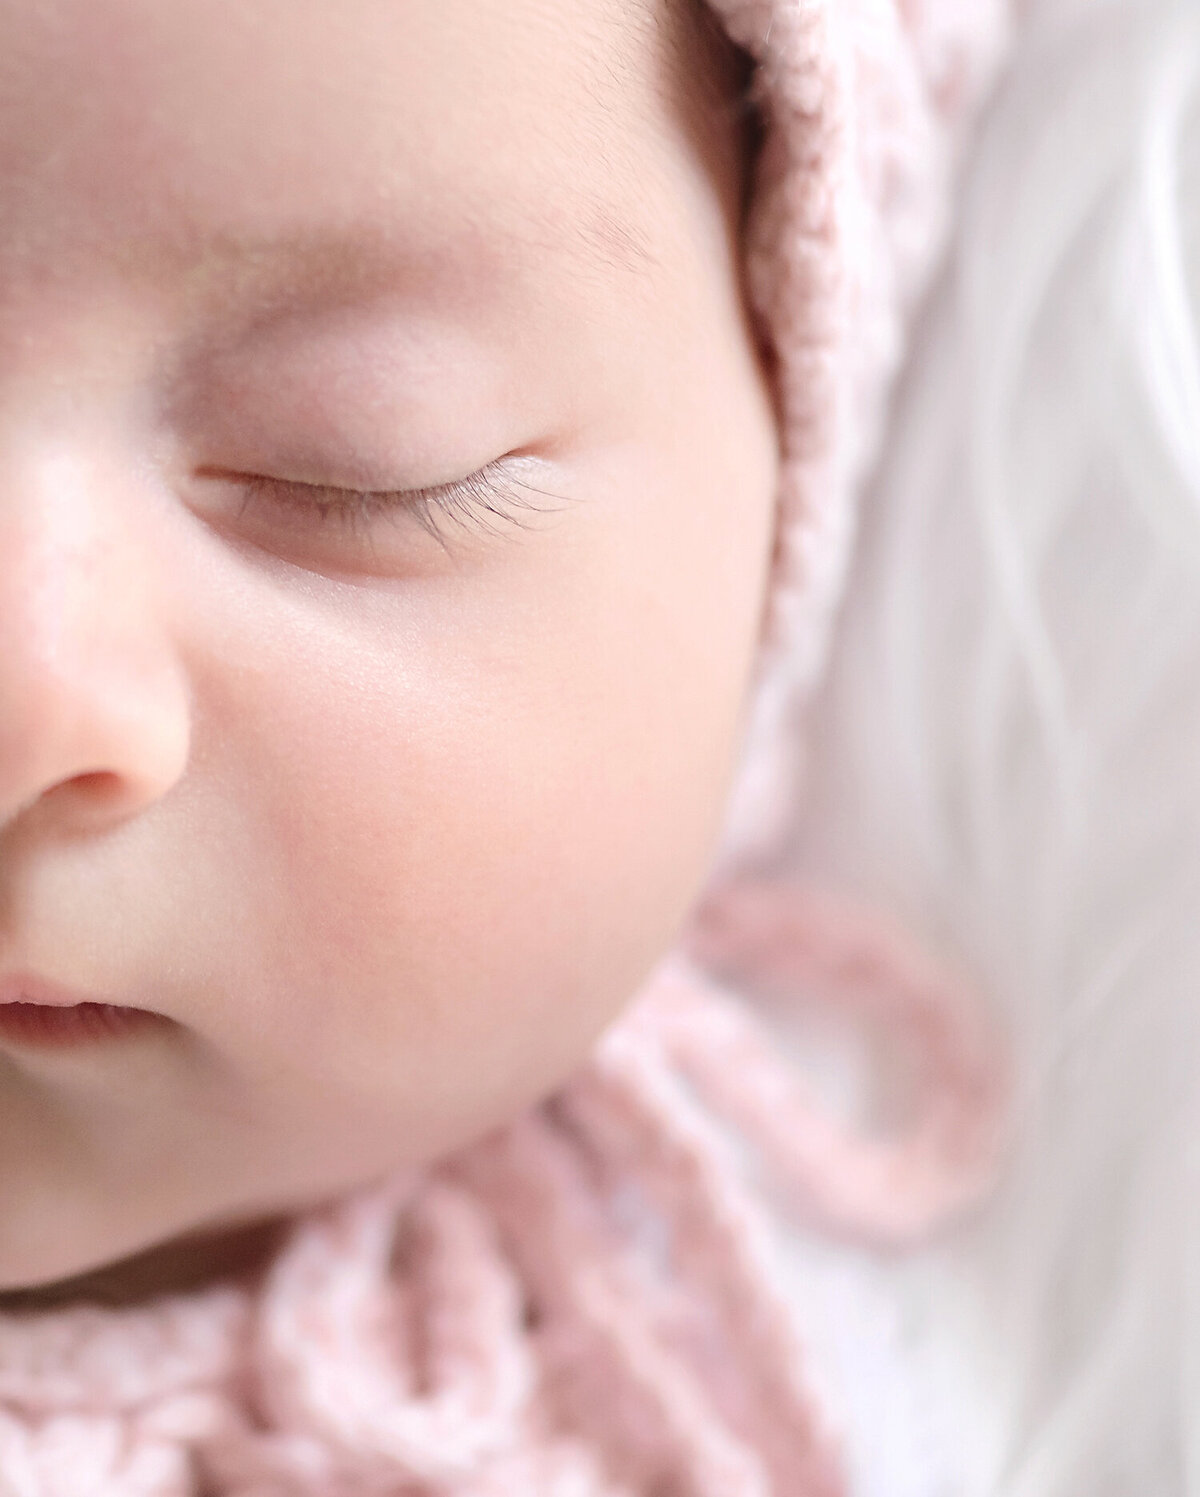 A detail close up image of a newborn baby girl's long eyelashes.